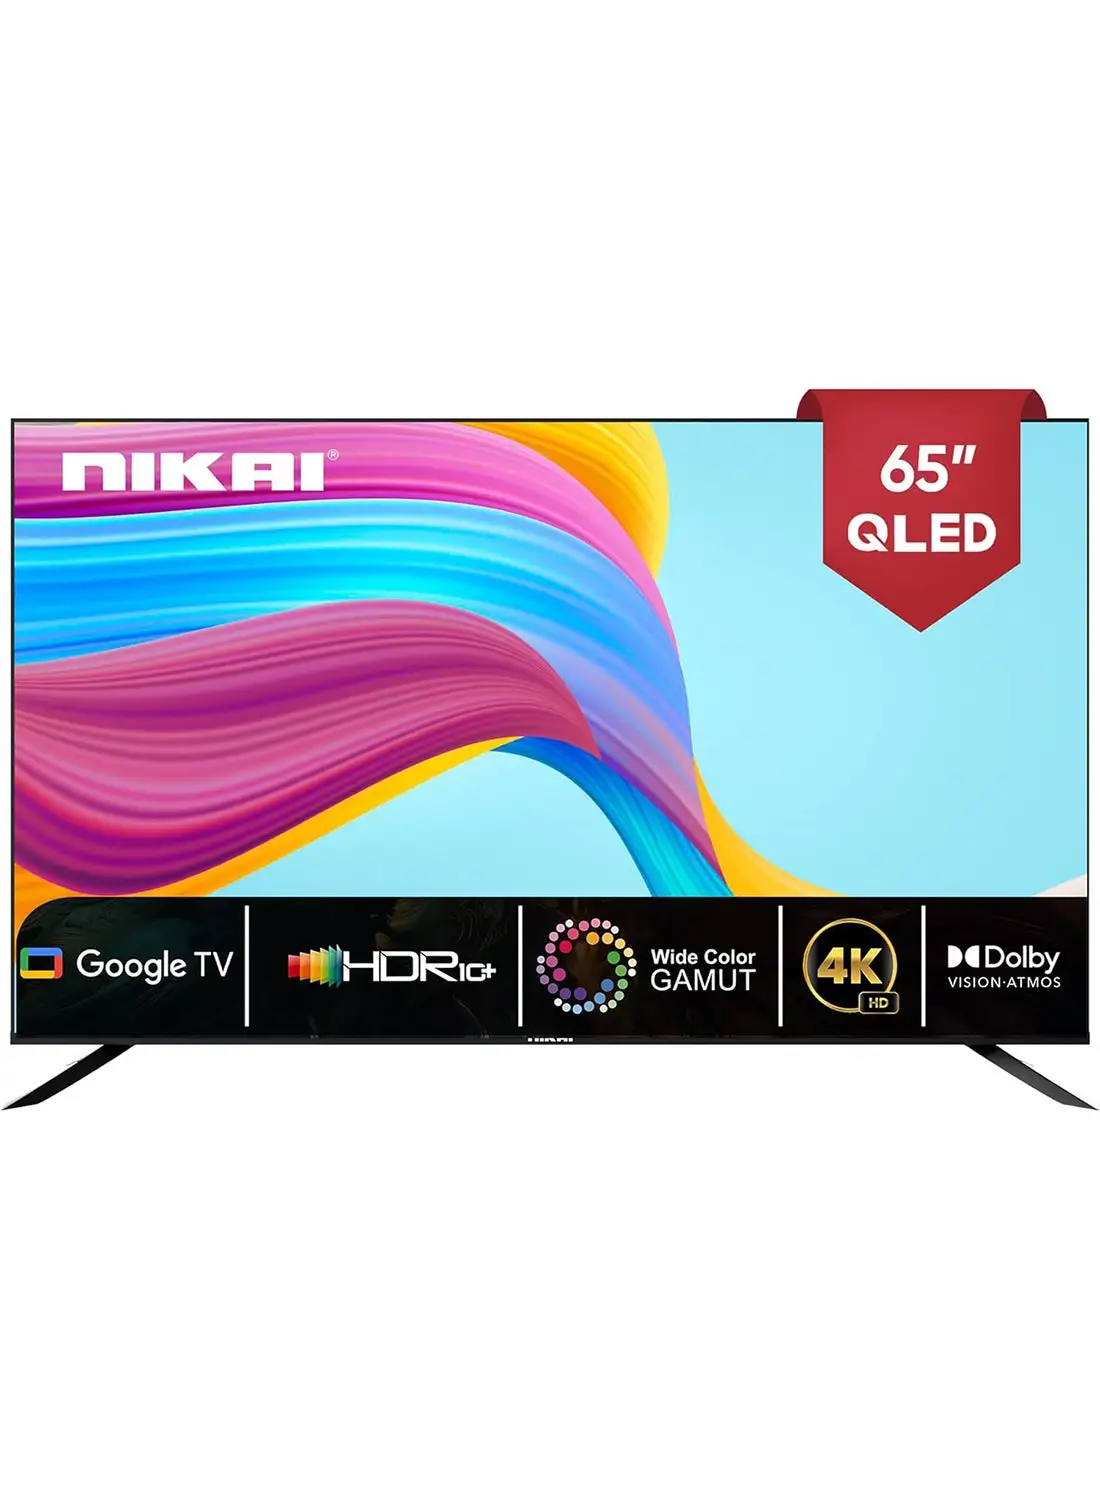 NIKAI Pro 65 Inch QLED 4K Smart Google TV, Andrioid TV OS, Voice Search, Youtube, Netflix, Shahid, Wide Color Gamut, 3860x2160 Pixels, HDR10+, Dolby Atmos, ChromeCast Bulit-In NPROG65QLED Black